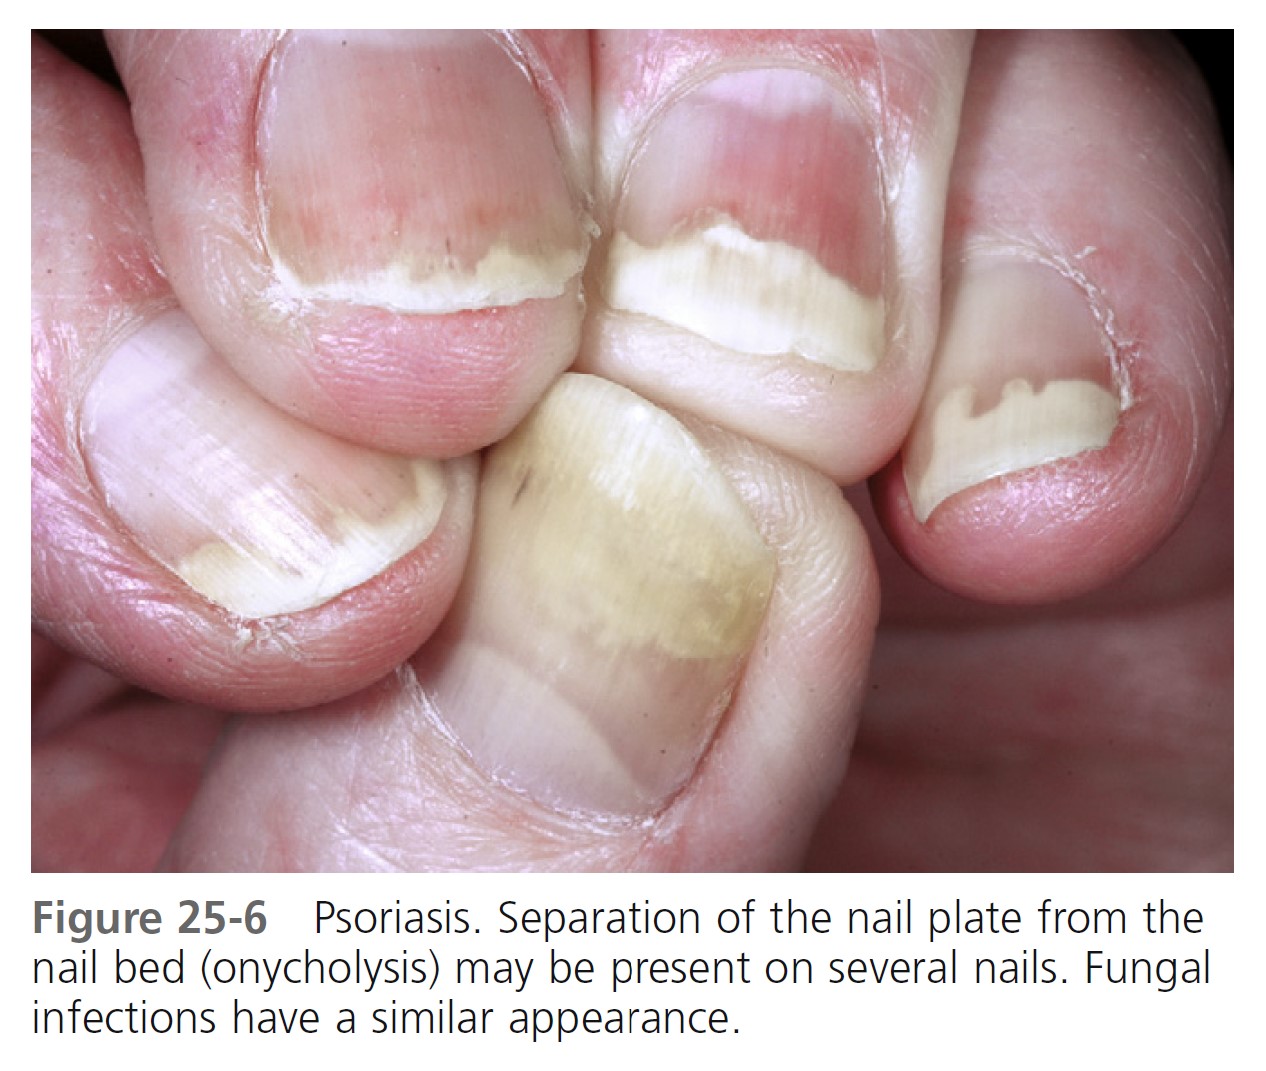 Ingrown Toenails: Signs, Causes, Treatment & Prevention